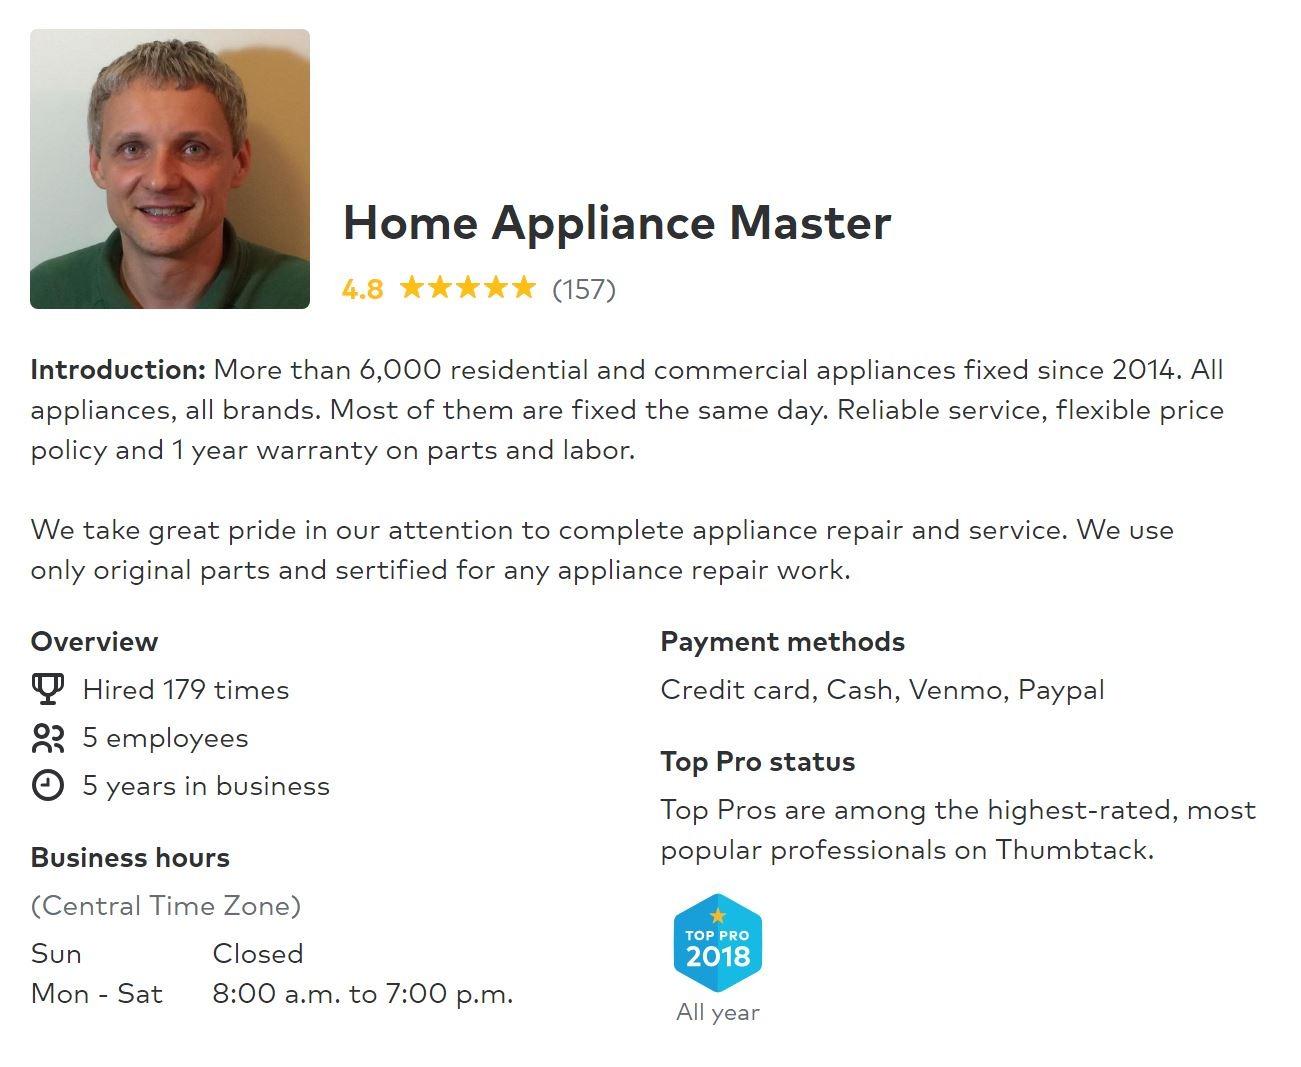 Home Appliance Master Photo